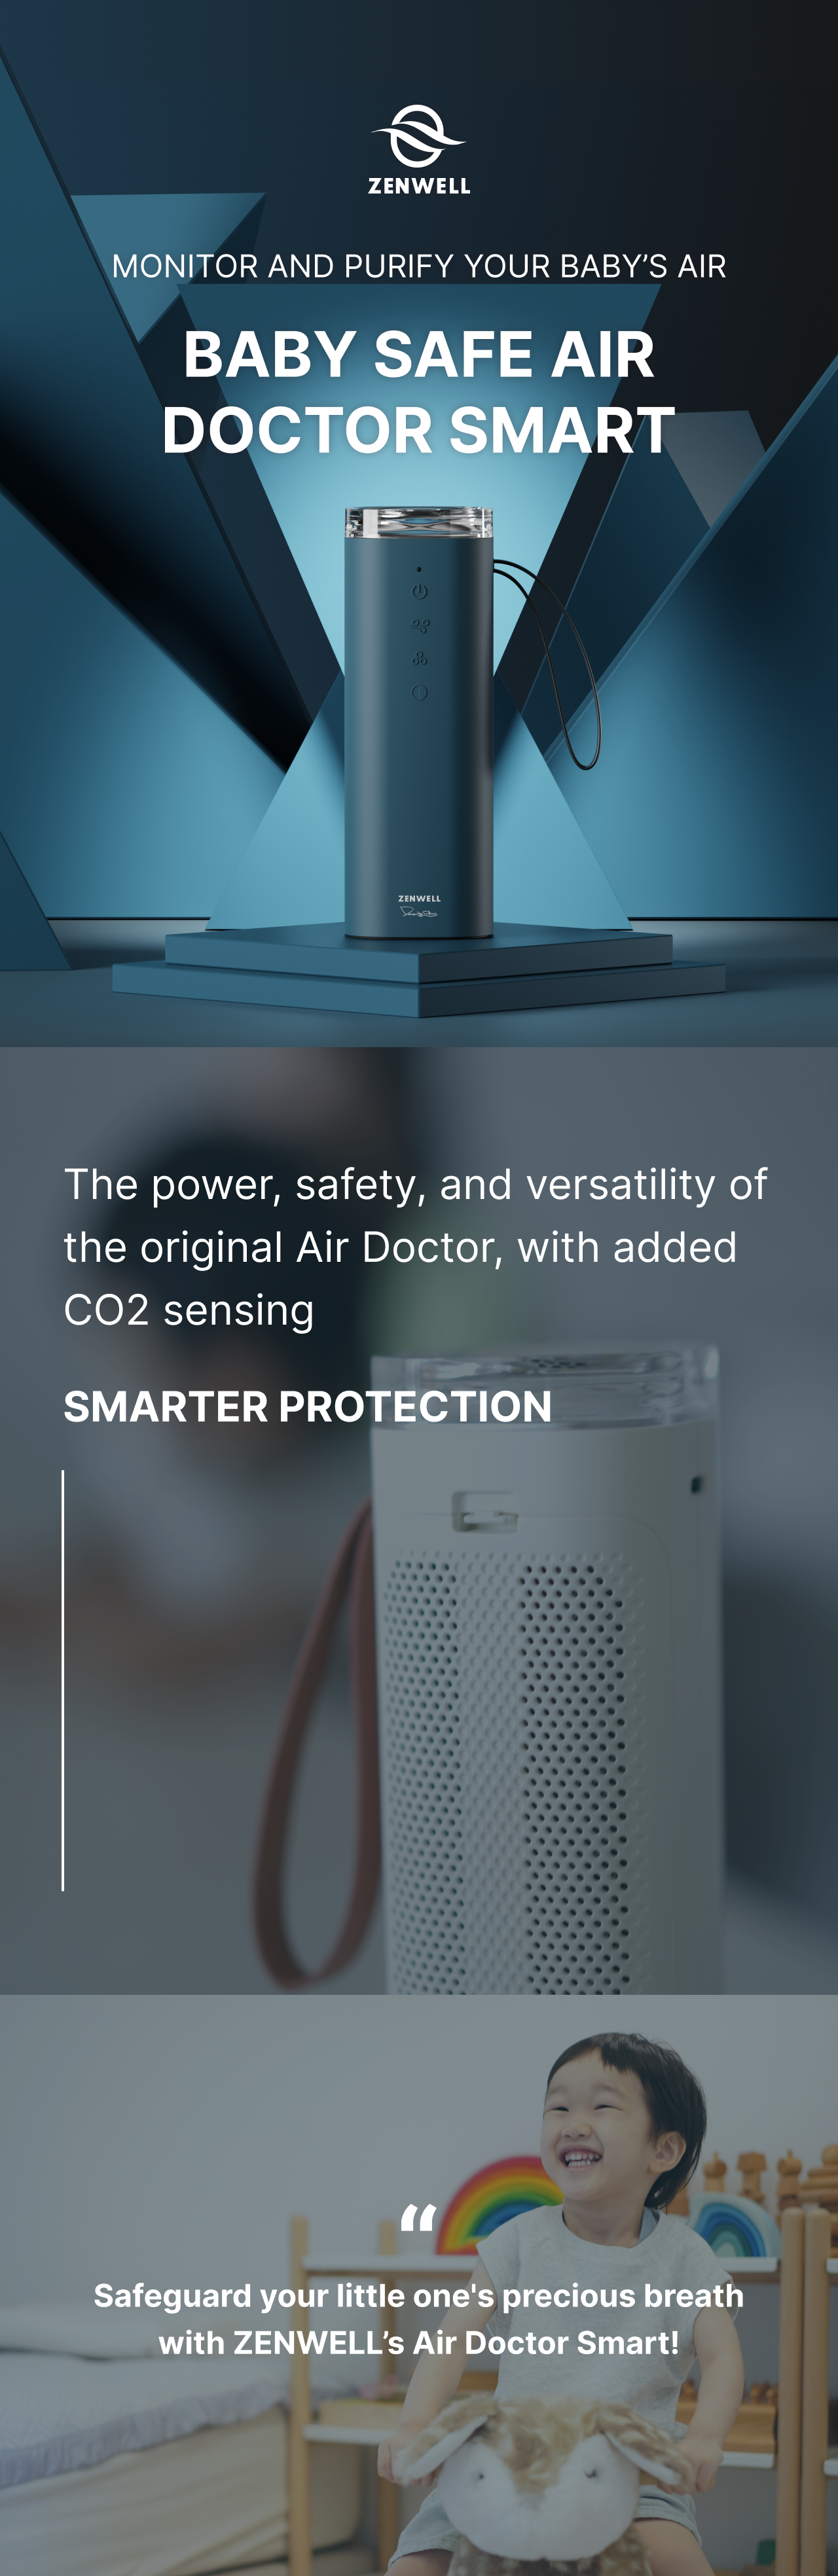 Baby Safe Air Doctor Smart product description image highlighting the unique CO2 sensing capabilities and benefits for children